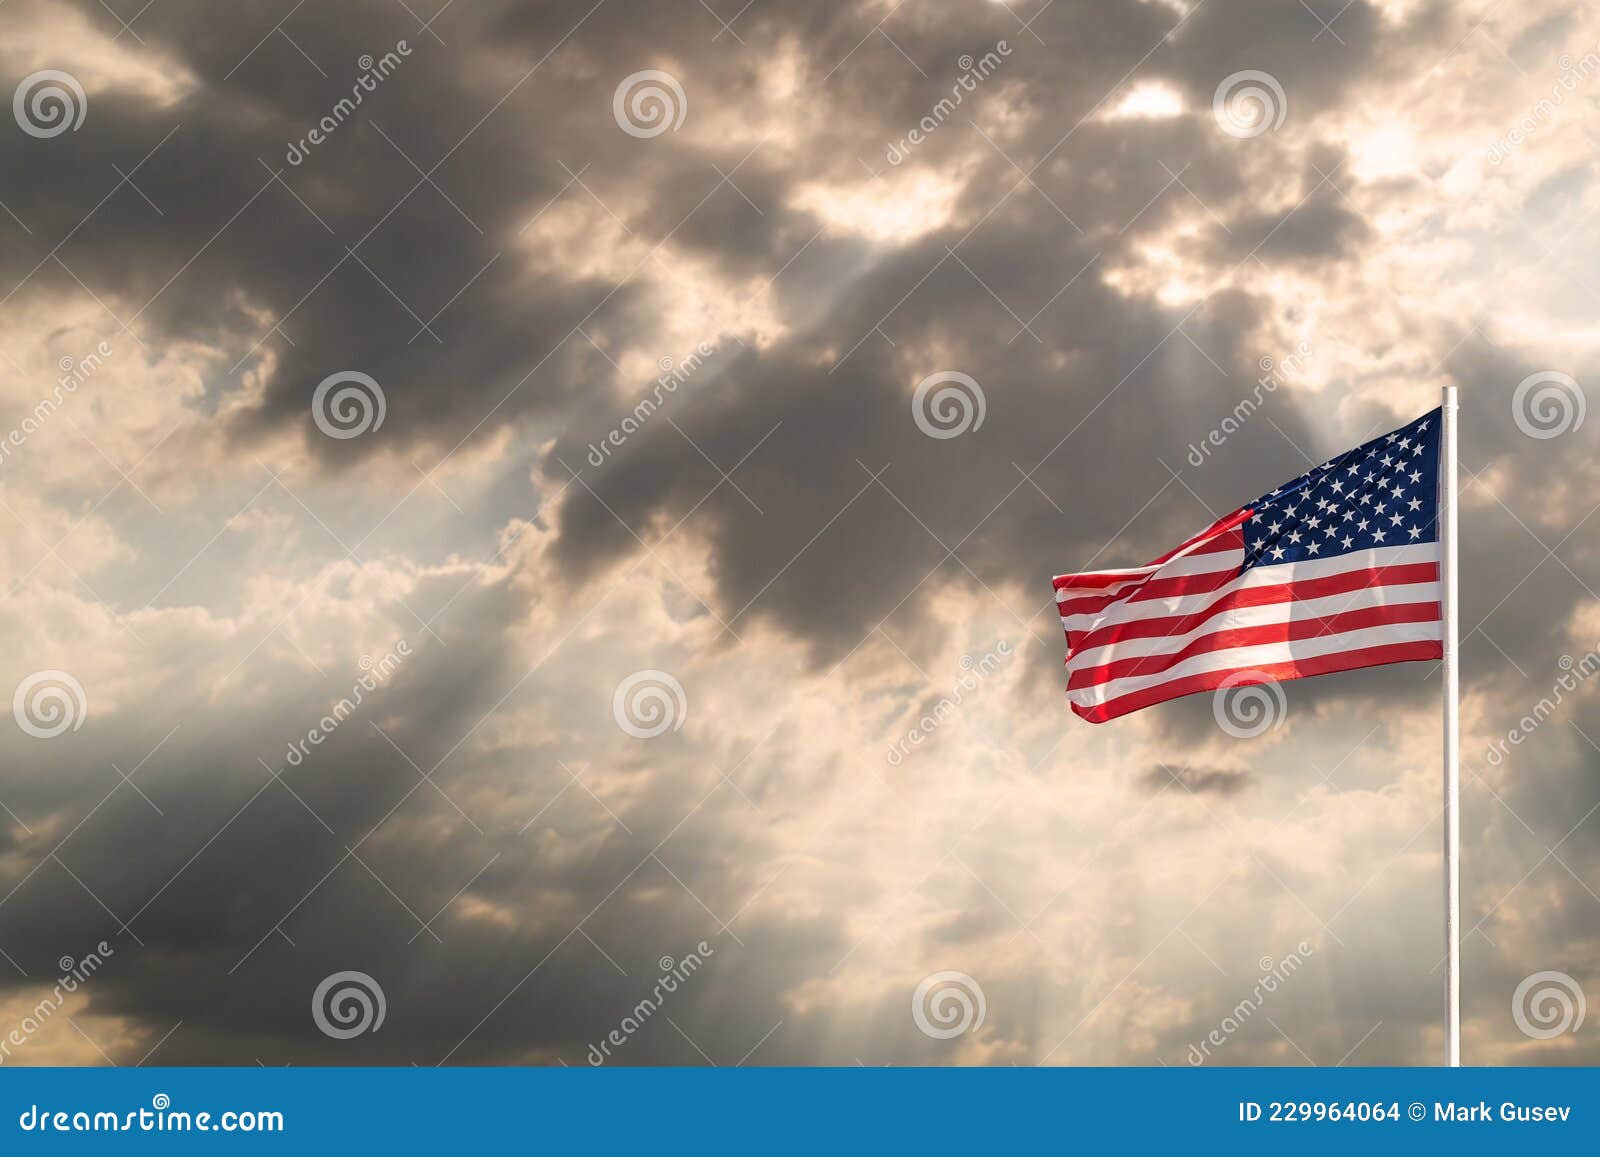 Flag of United States of America Dramatic Copy Space. USA in Nature Environment Stock Photo - Image of democracy, flag: 229964064